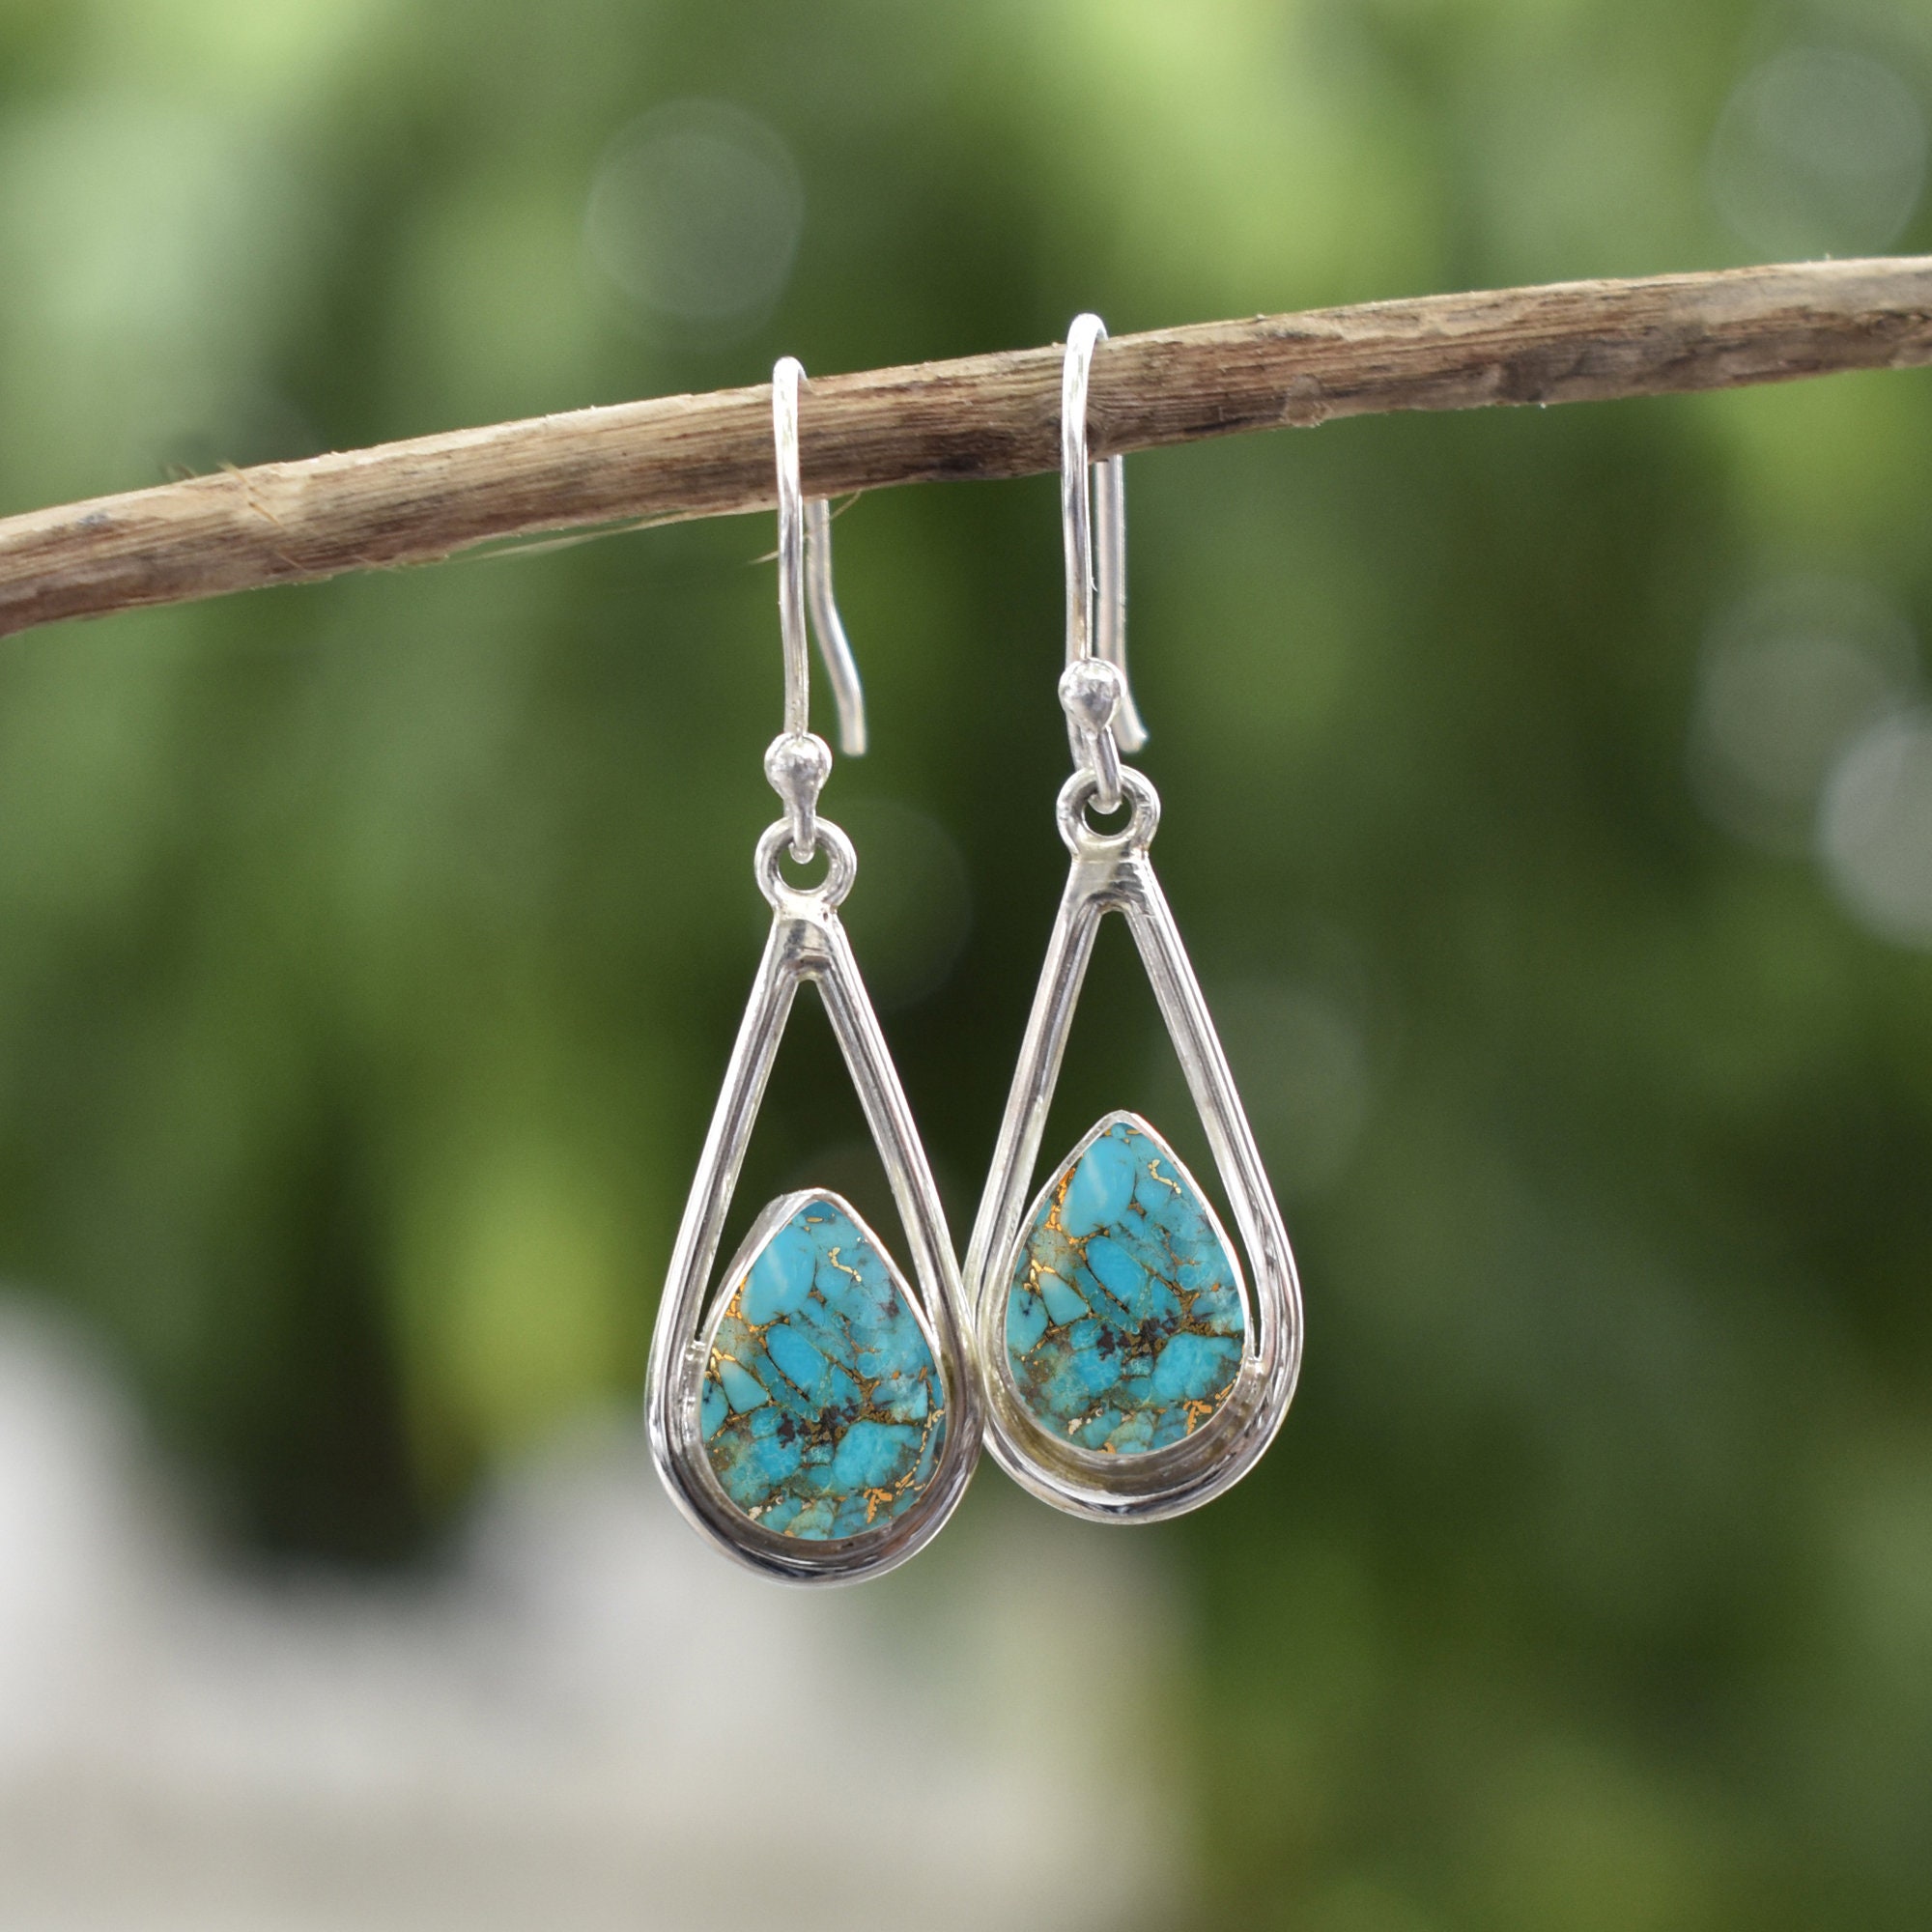 Large Turquoise Stud Teardrop Earrings with Upcycled Genuine LV Detailing  by Keep It Gypsy